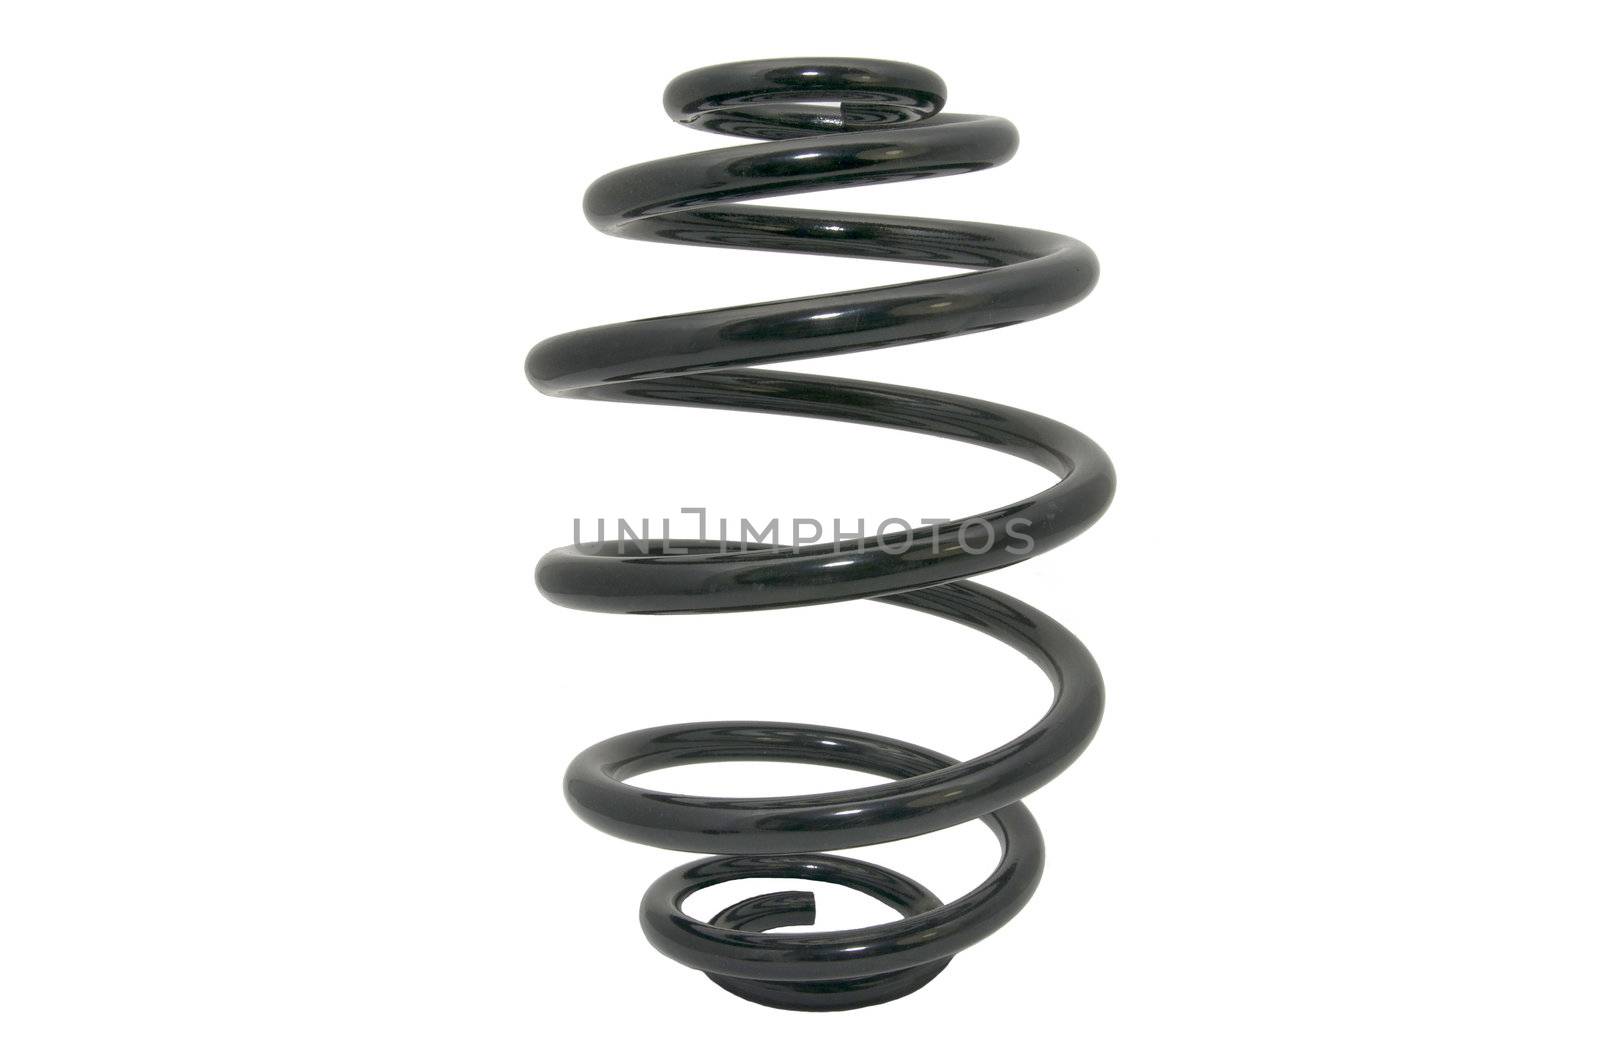 metal spring for a car on a white background